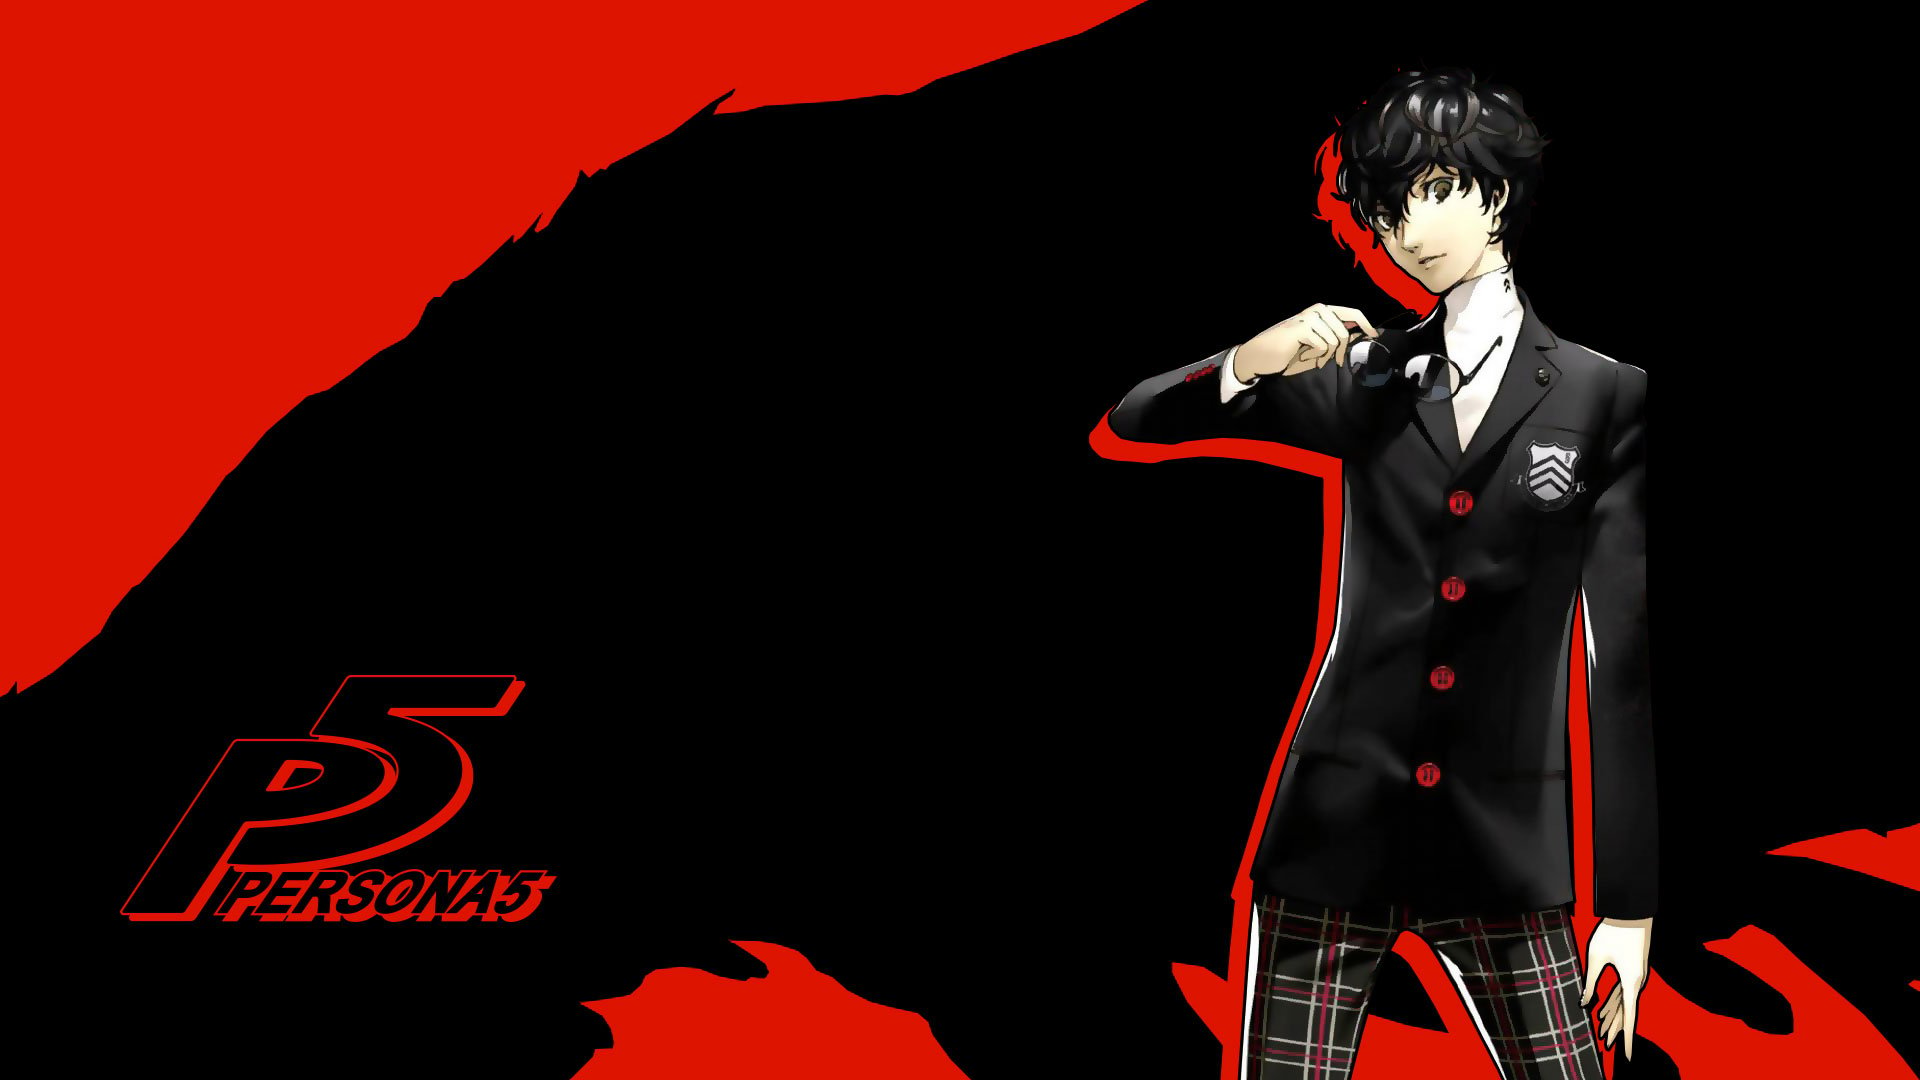 Persona 5 Wallpapers in Ultra HD 4K 1920x1080